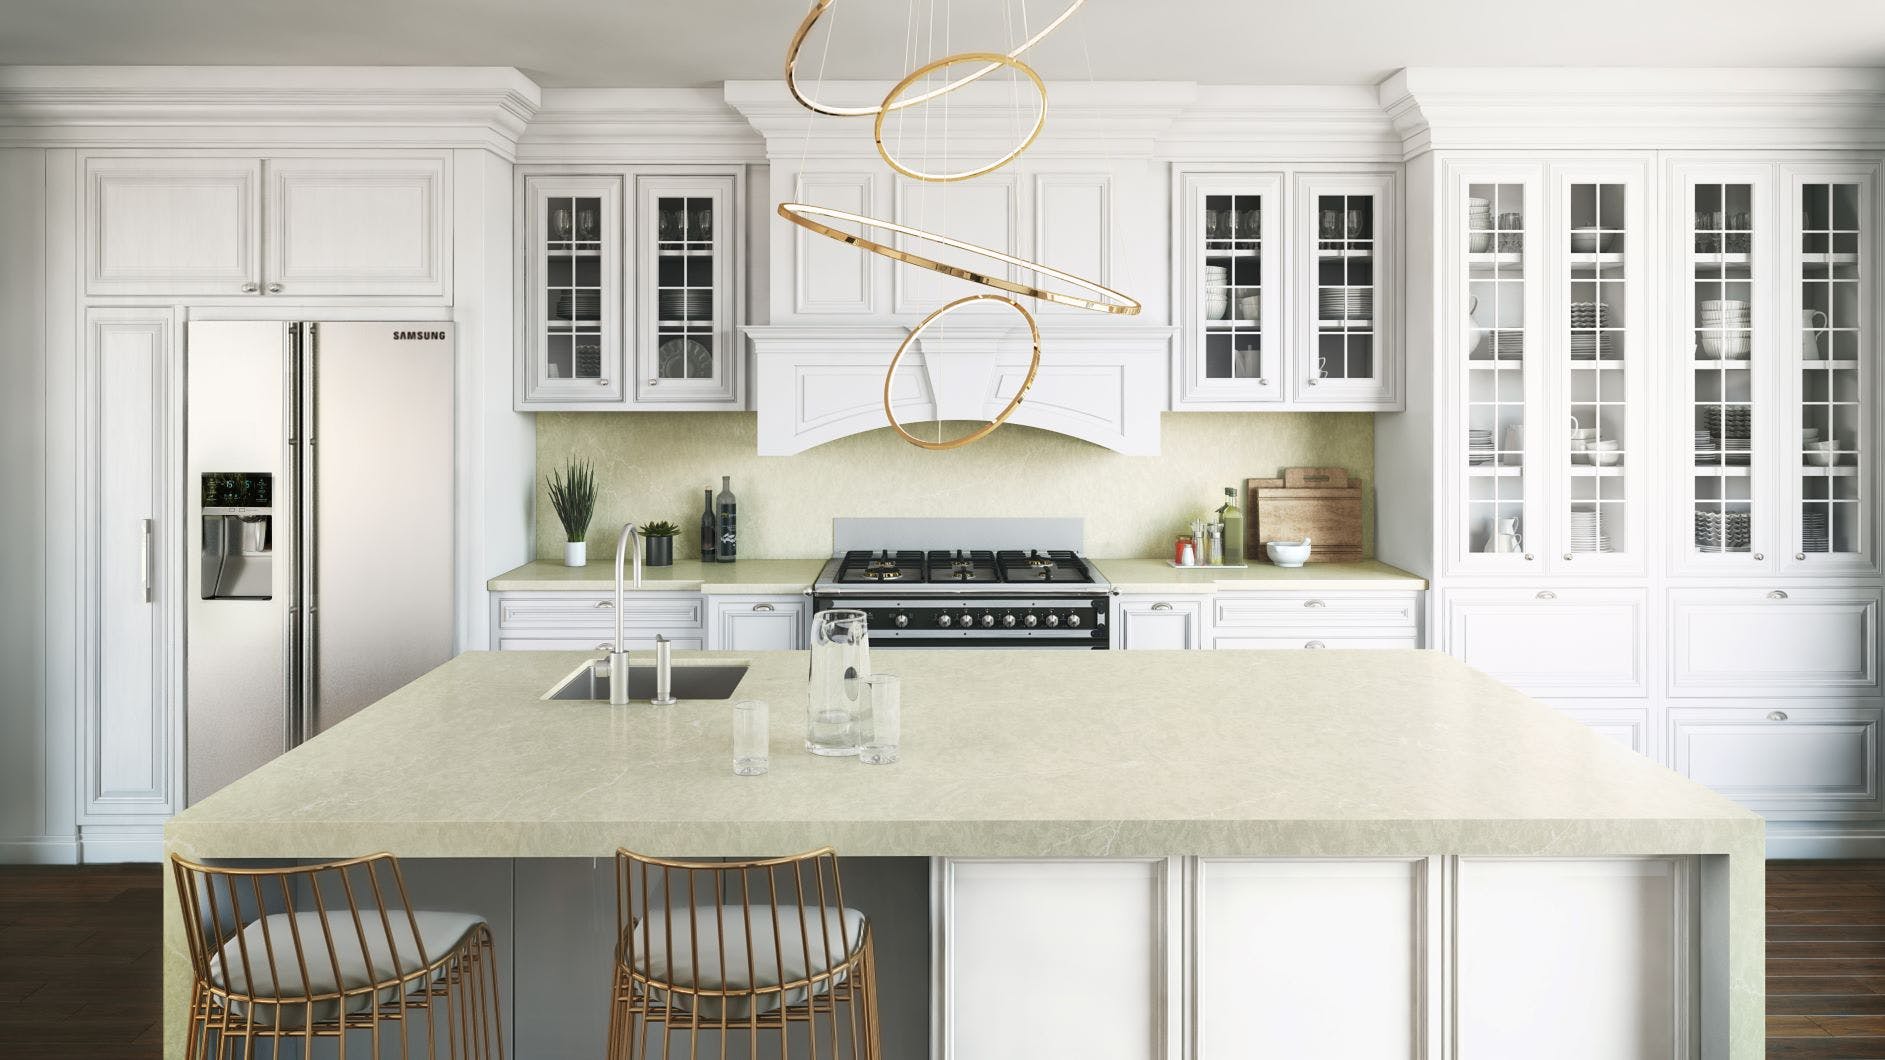 Image 37 of Silestone Silken Pearl Kitchen 1 in New additions to "Eternal", the best-selling Silestone® colour collection - Cosentino